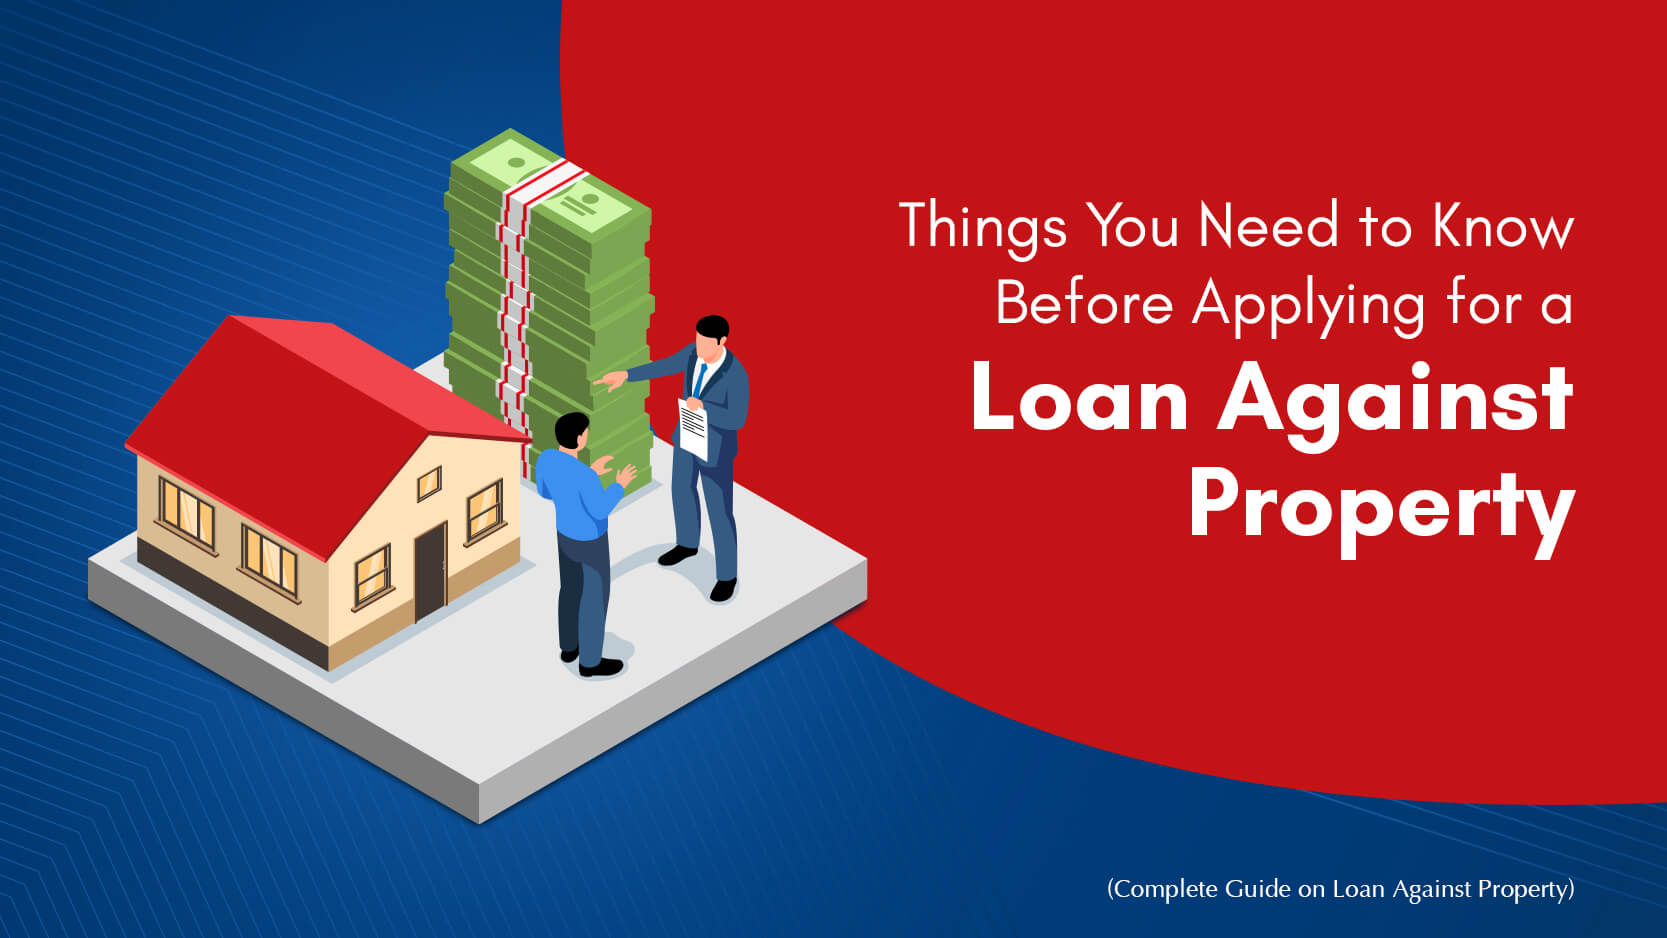 Things You Need to Know Before Applying for a Loan Against Property